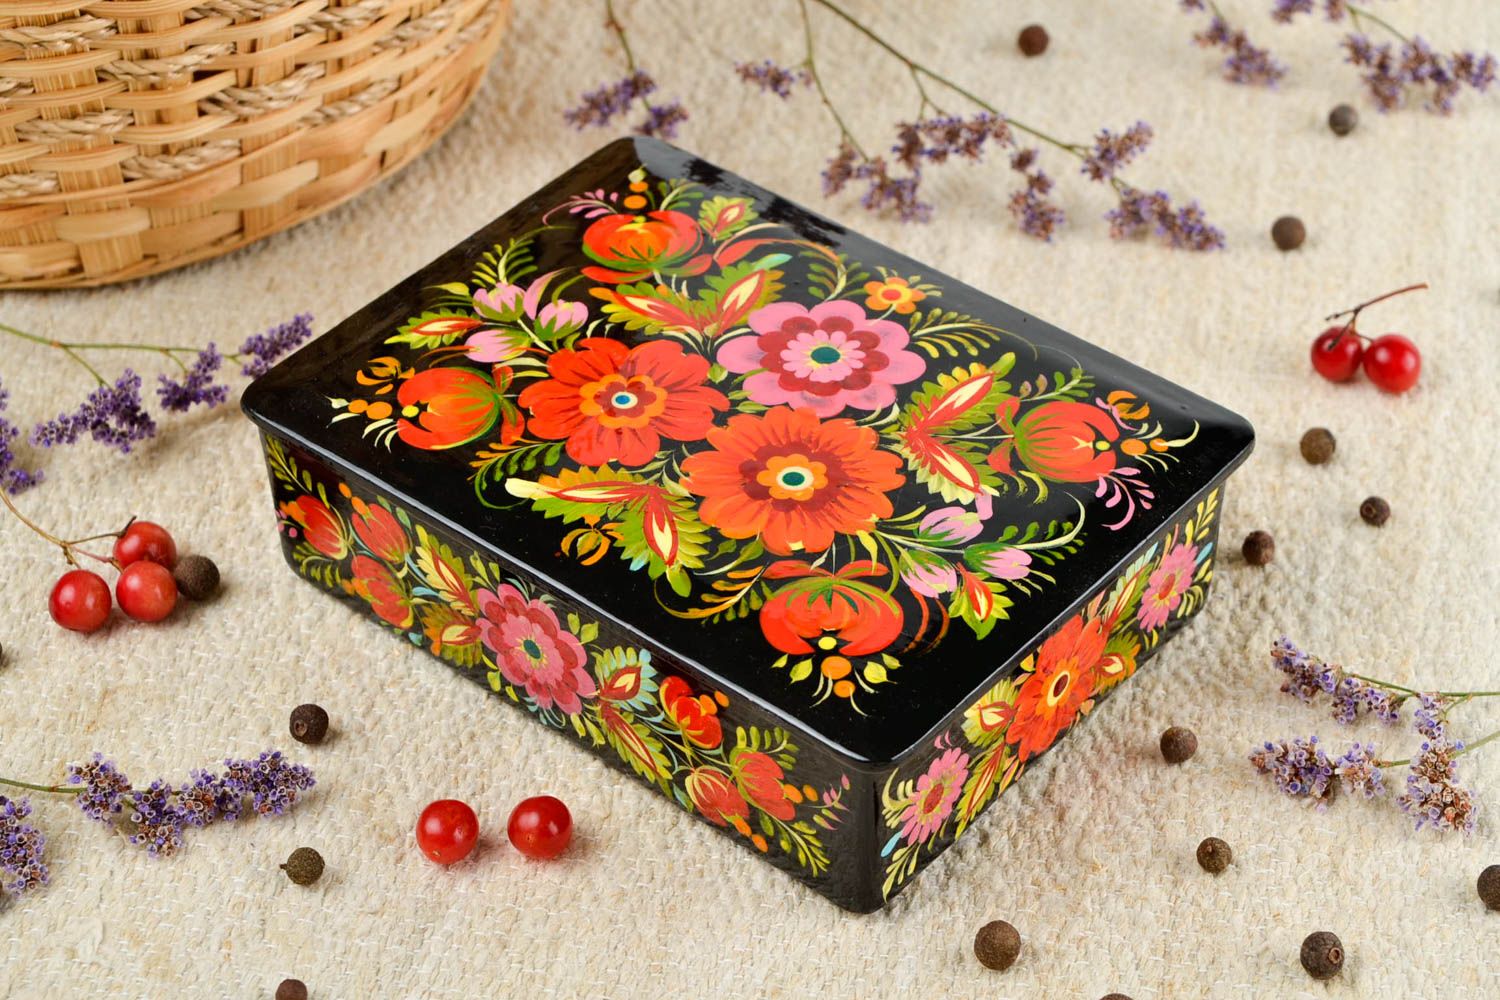 Homemade jewelry boxes for women jewellery box wooden gifts rustic home decor photo 1